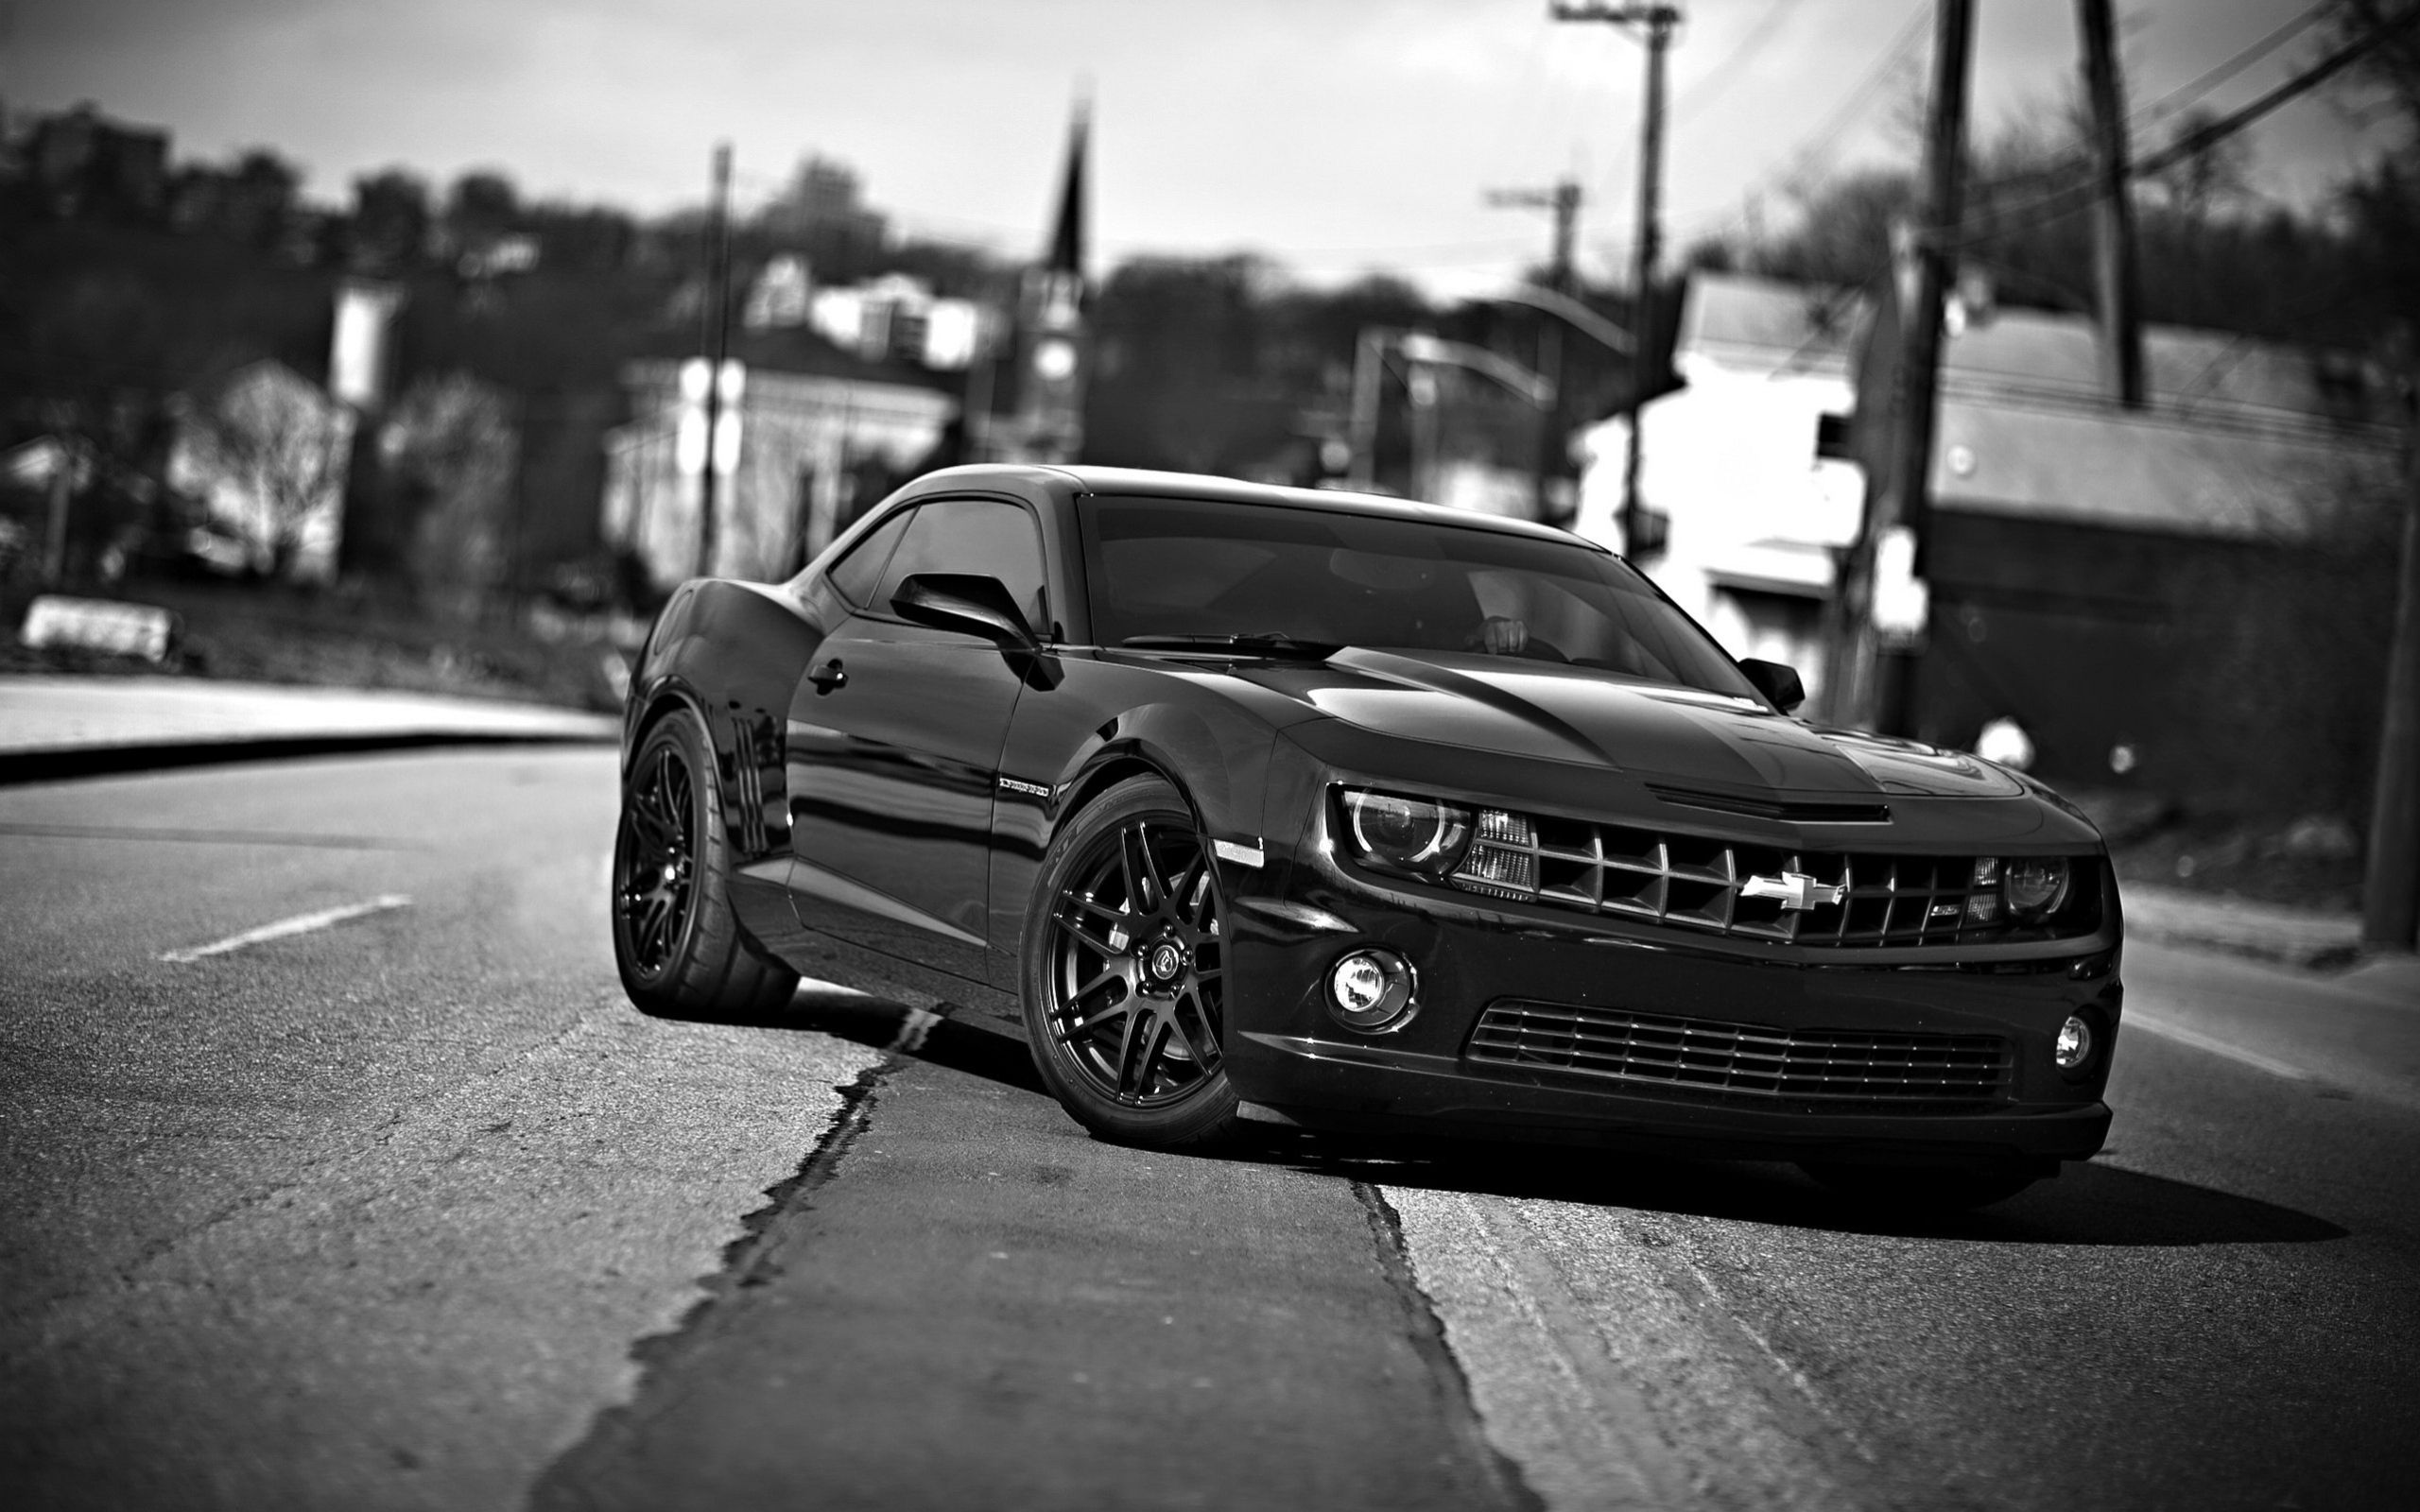 chb, auto, chevrolet, cars, front view, bw, chevrolet camaro 2160p